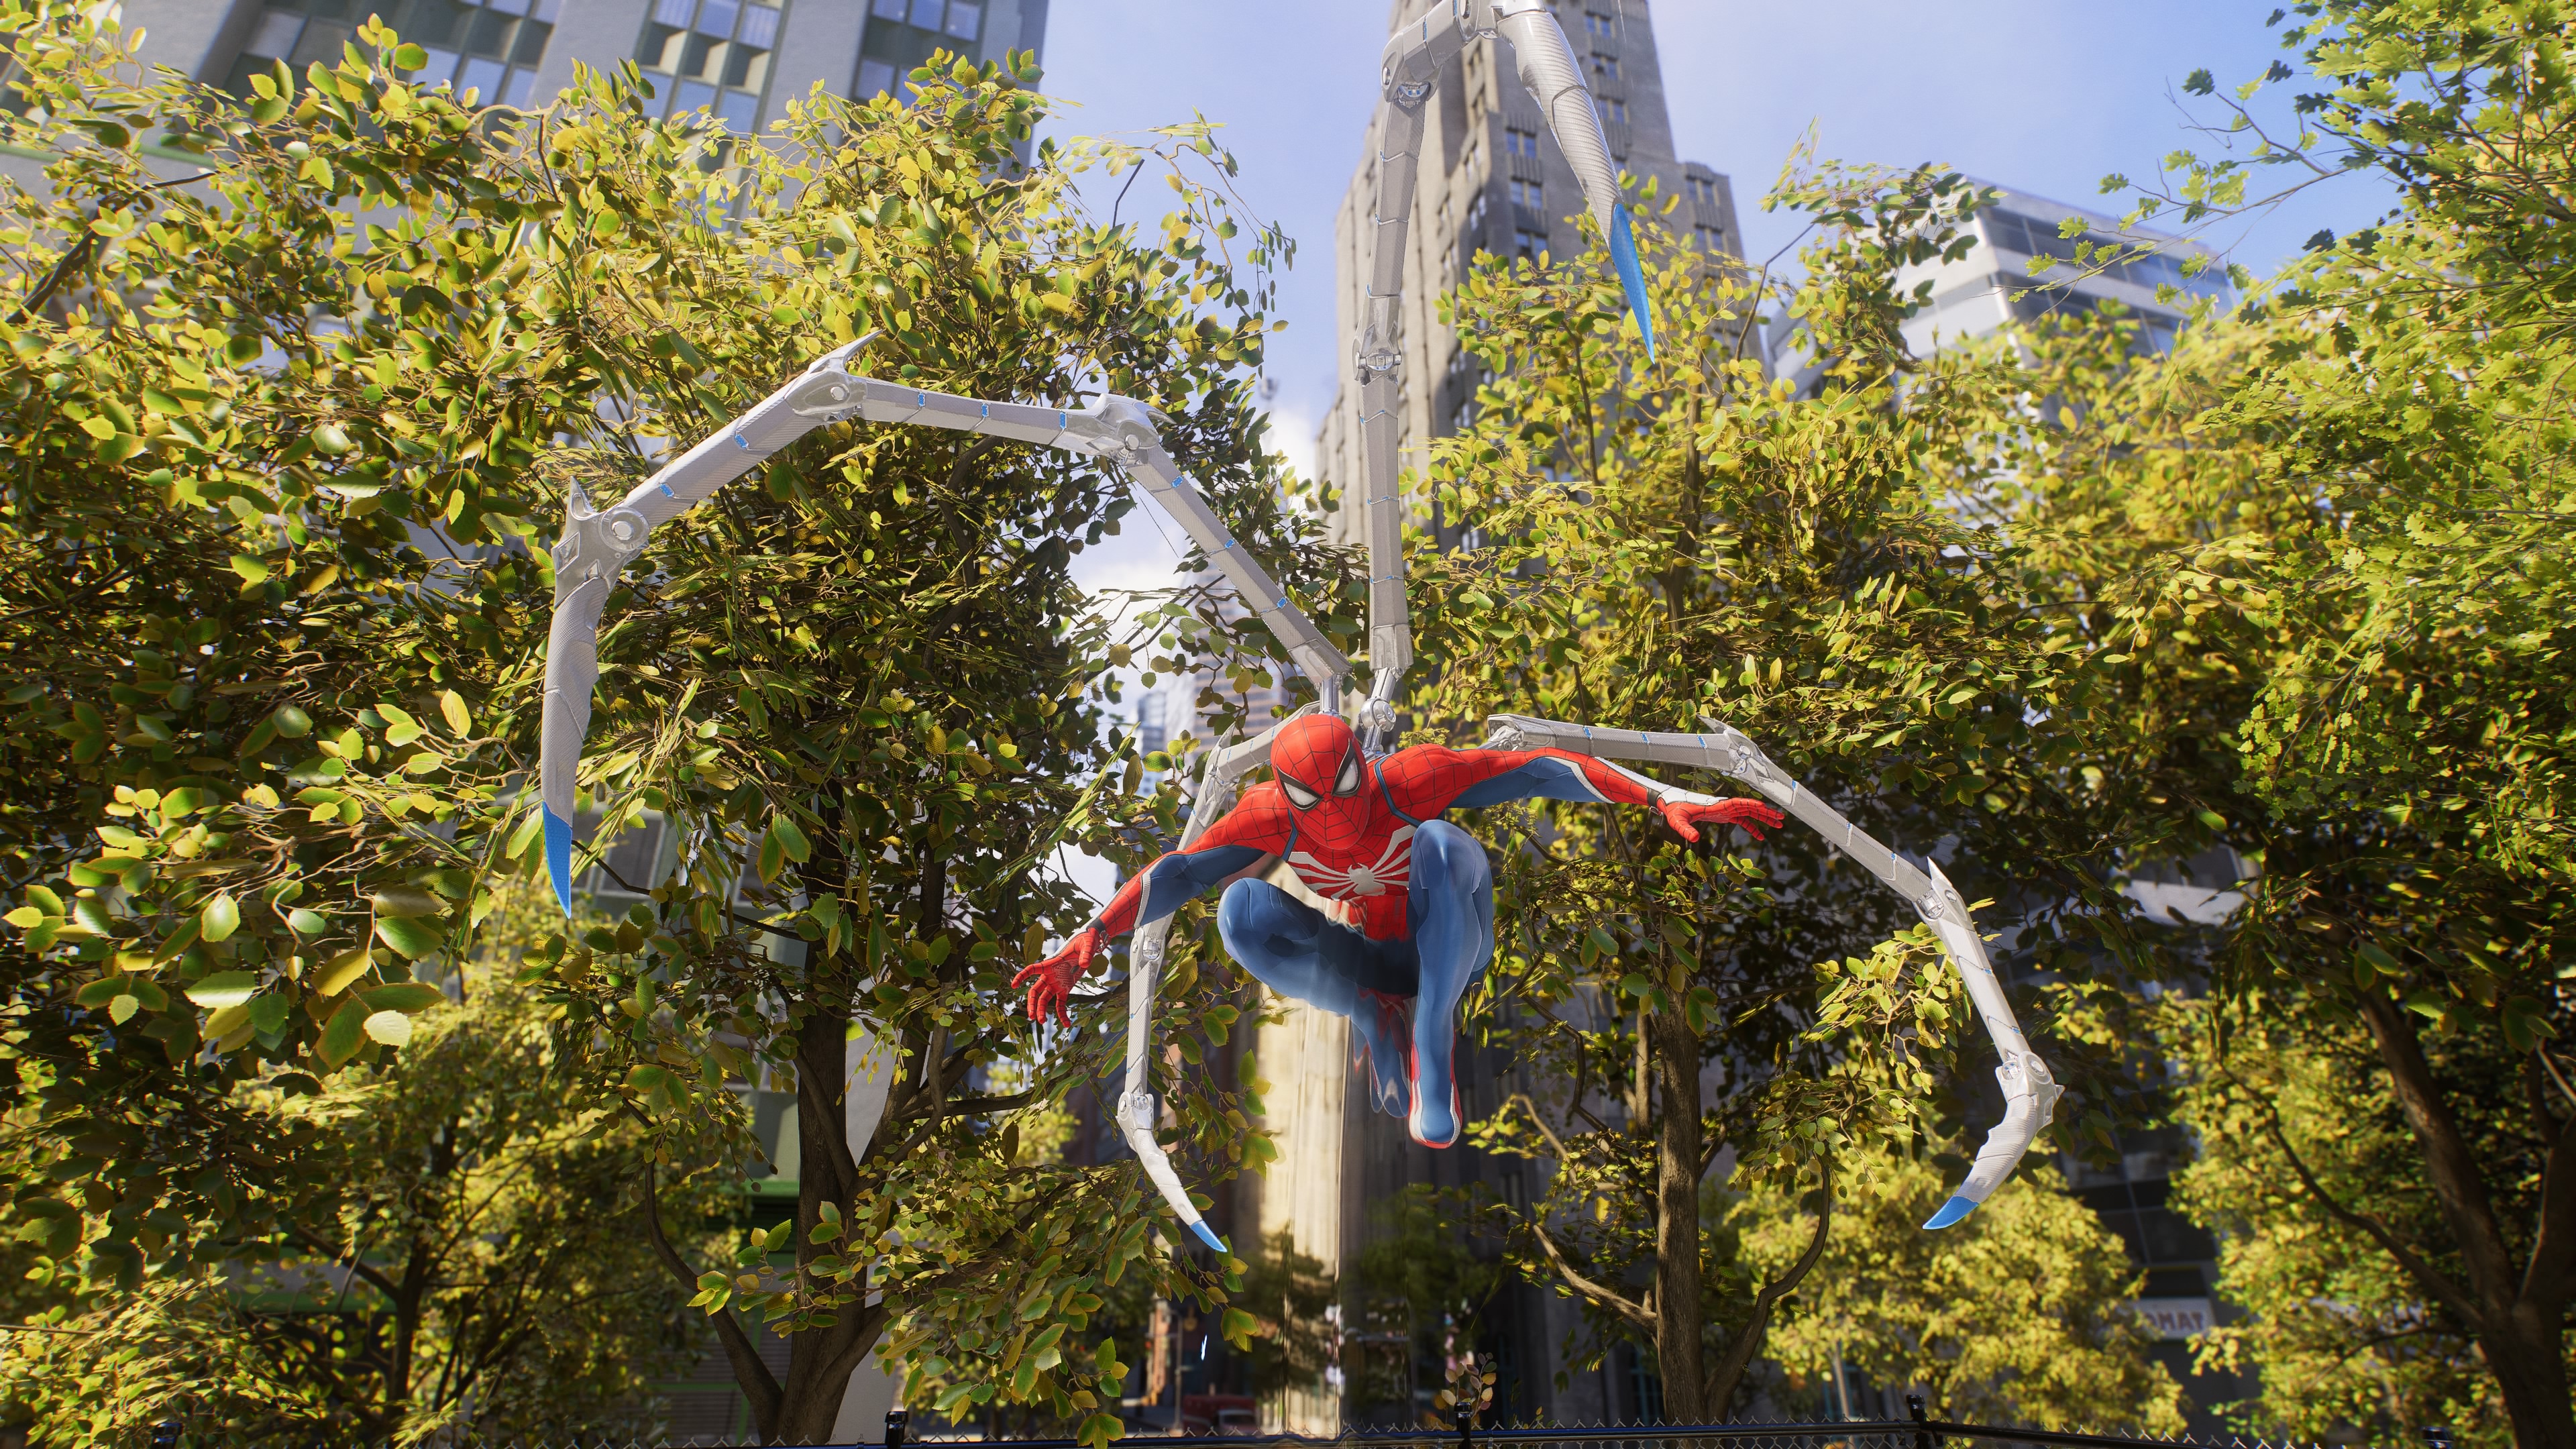 Peter hangs in the air with his mechanical spider arms in Spider-Man 2